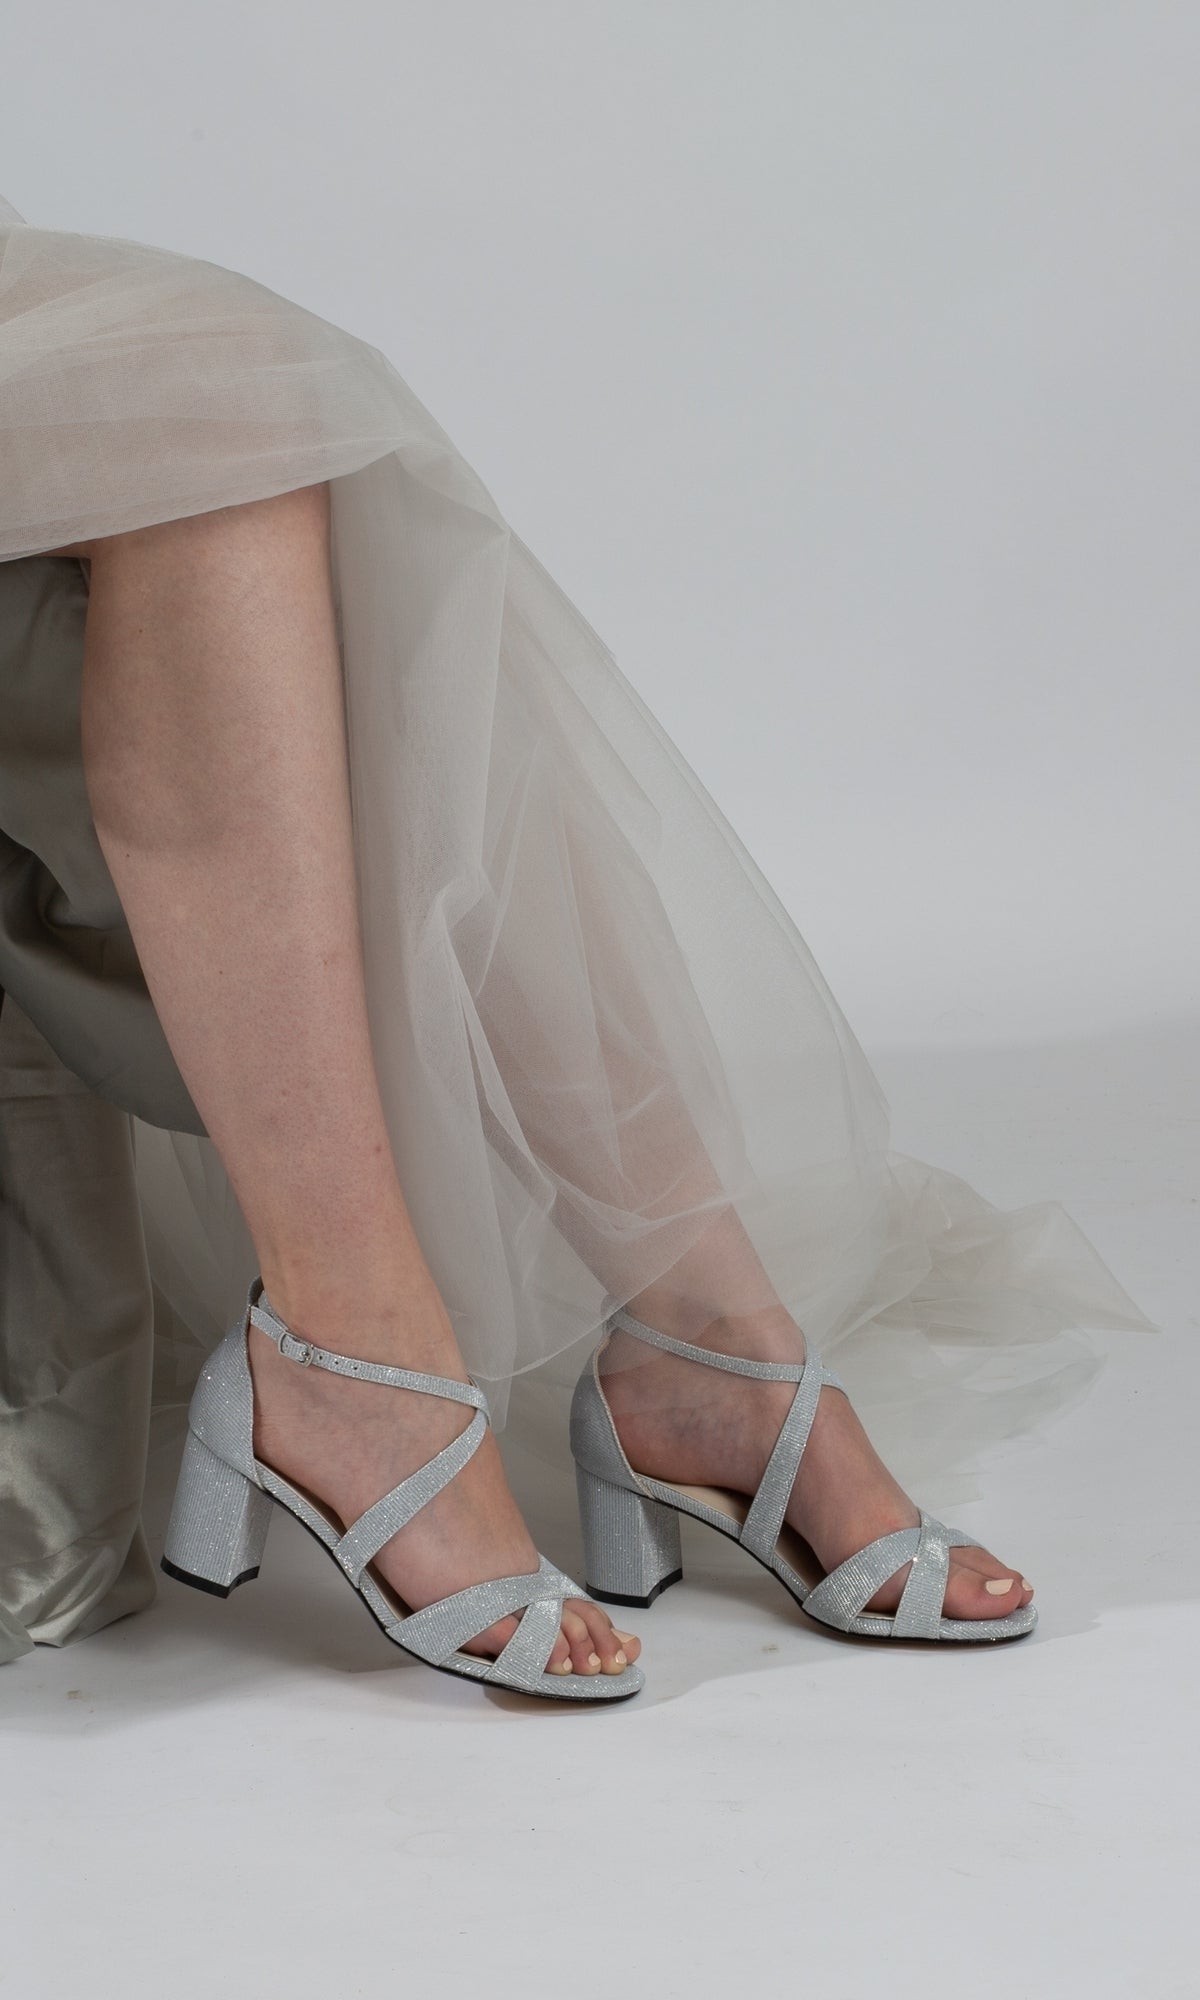 Silver Heels | Women's Silver Sandals | Silver Shoes | Very.co.uk